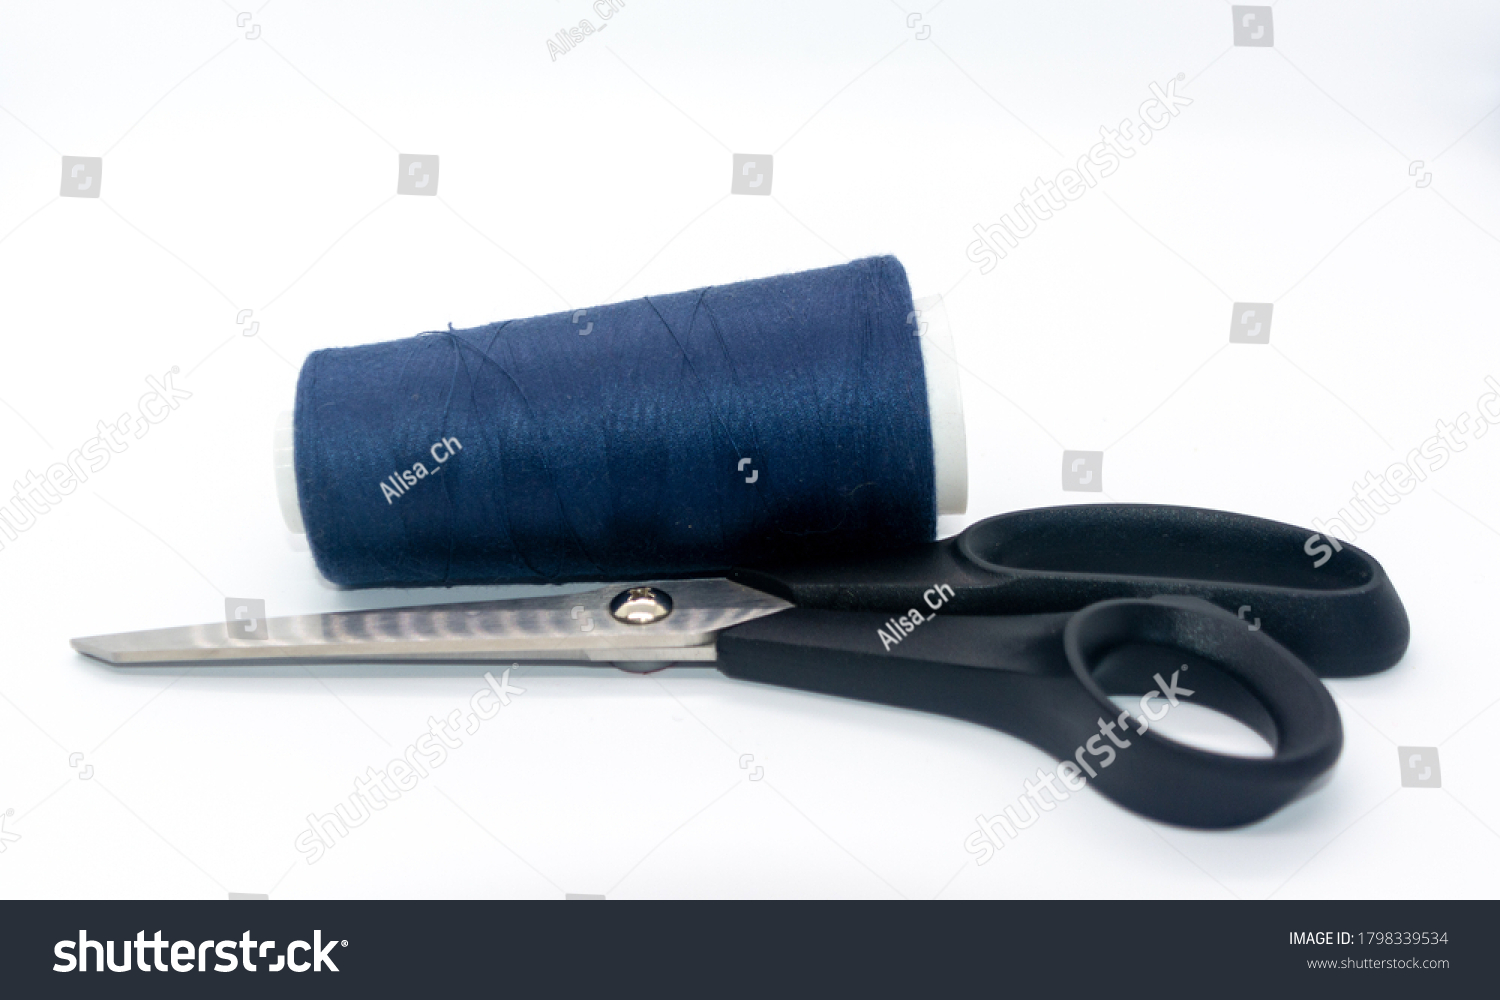 Blue bobbin thread and black scissors isolated on white background. Close up of a spool of blue sewing thread. Thread is a type of yarn but similarly used for sewing.  #1798339534